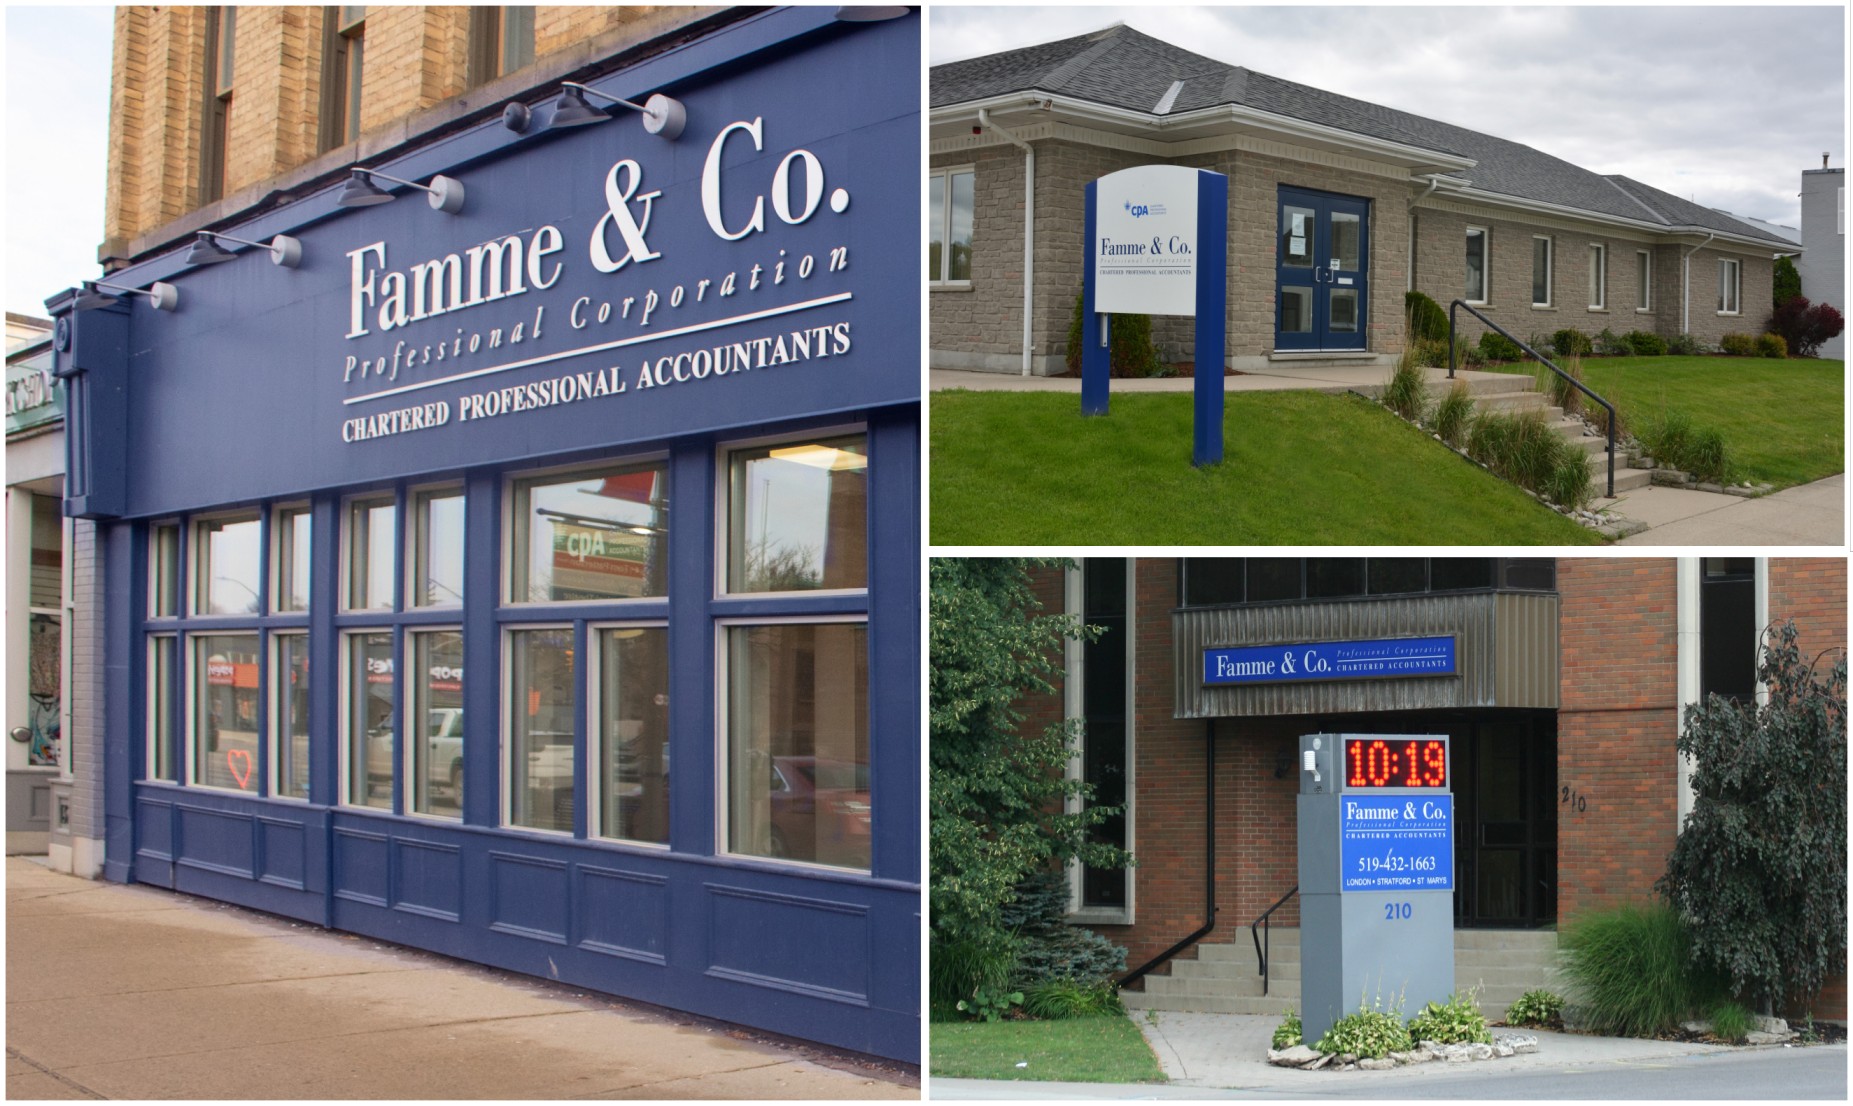 Famme & Co. Offices in their various locations